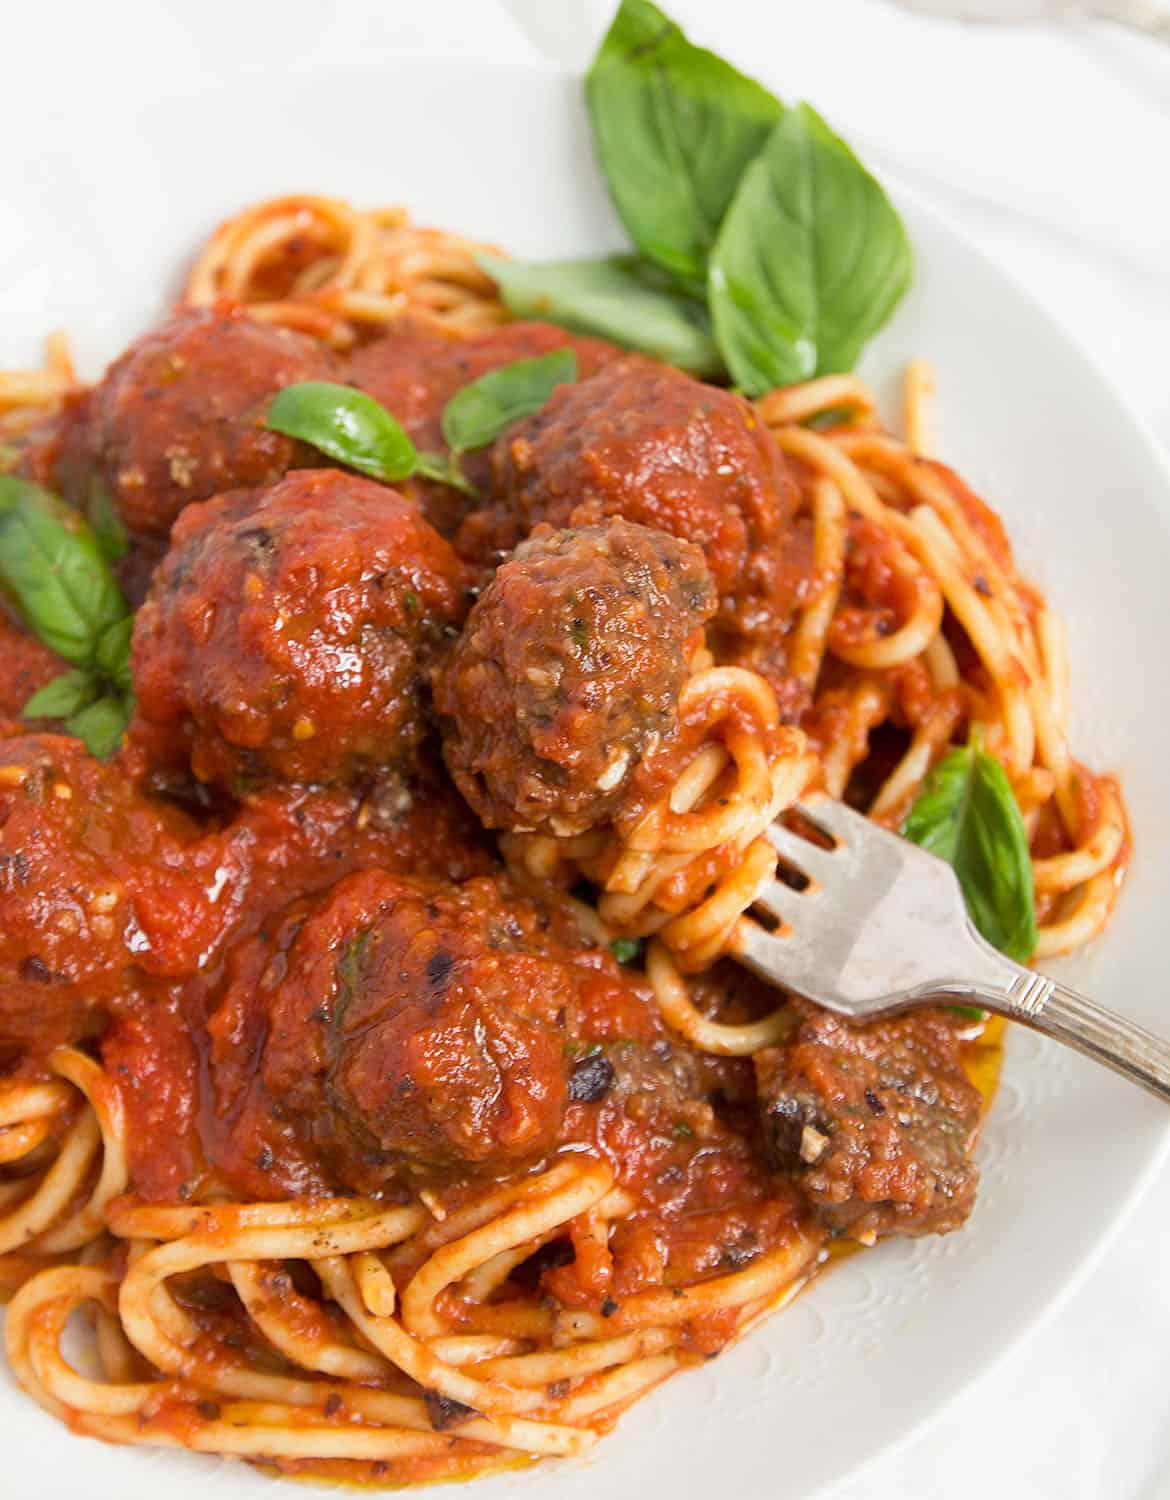 Vegan meatballs with green basil leaves and spaghetti on a white plate.